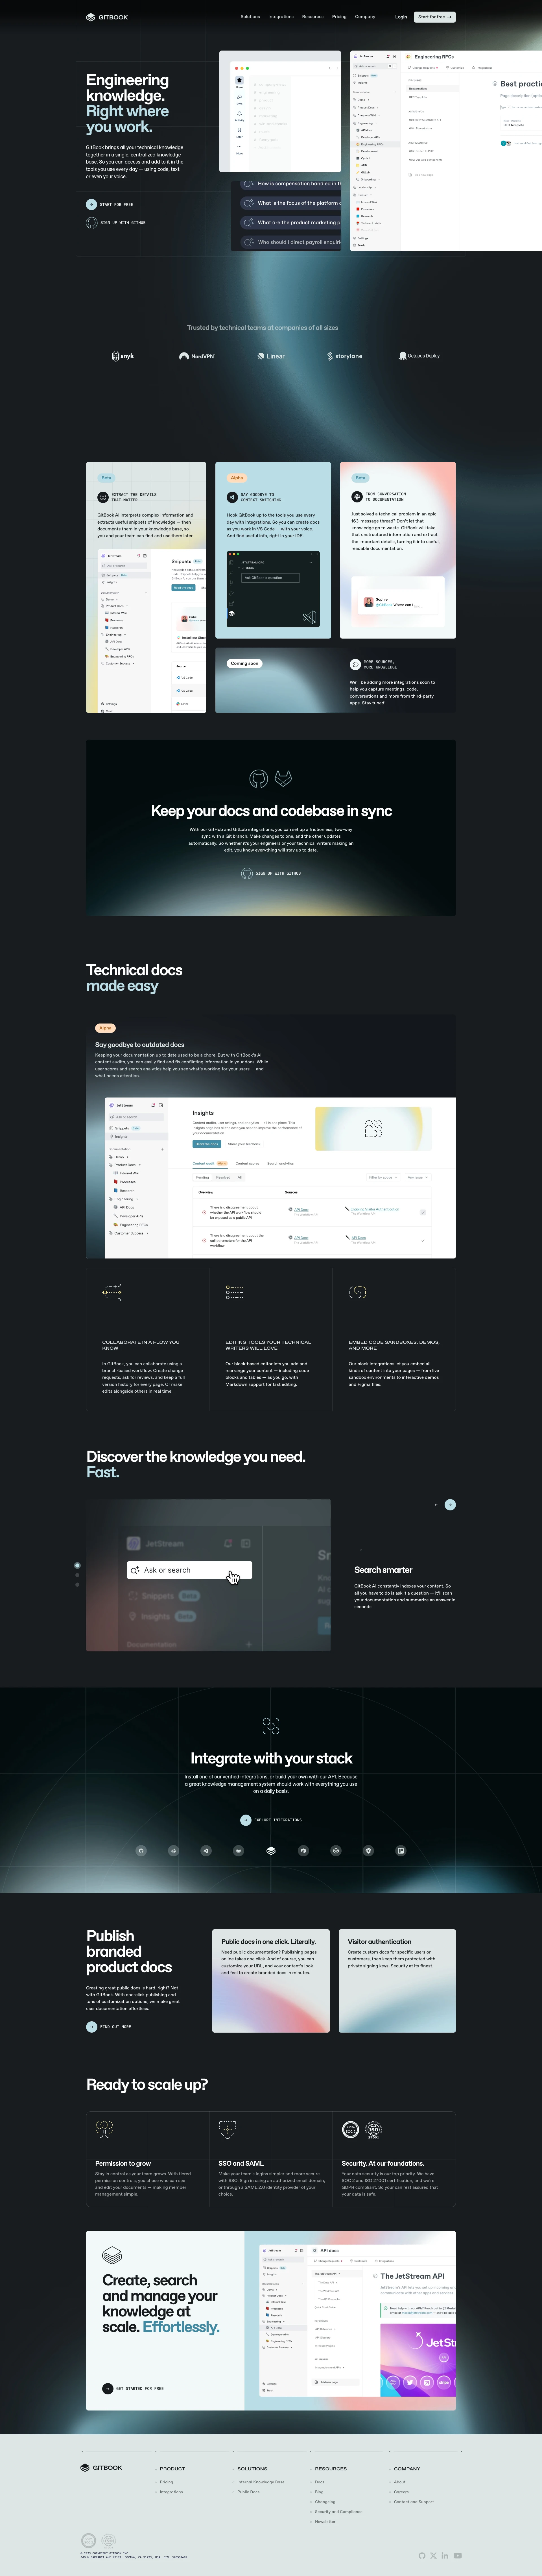 GitBook Landing Page Example: Engineering knowledge. Right where you work. GitBook brings all your technical knowledge together in a single, centralized knowledge base. So you can access and add to it in the tools you use every day — using code, text or even your voice.